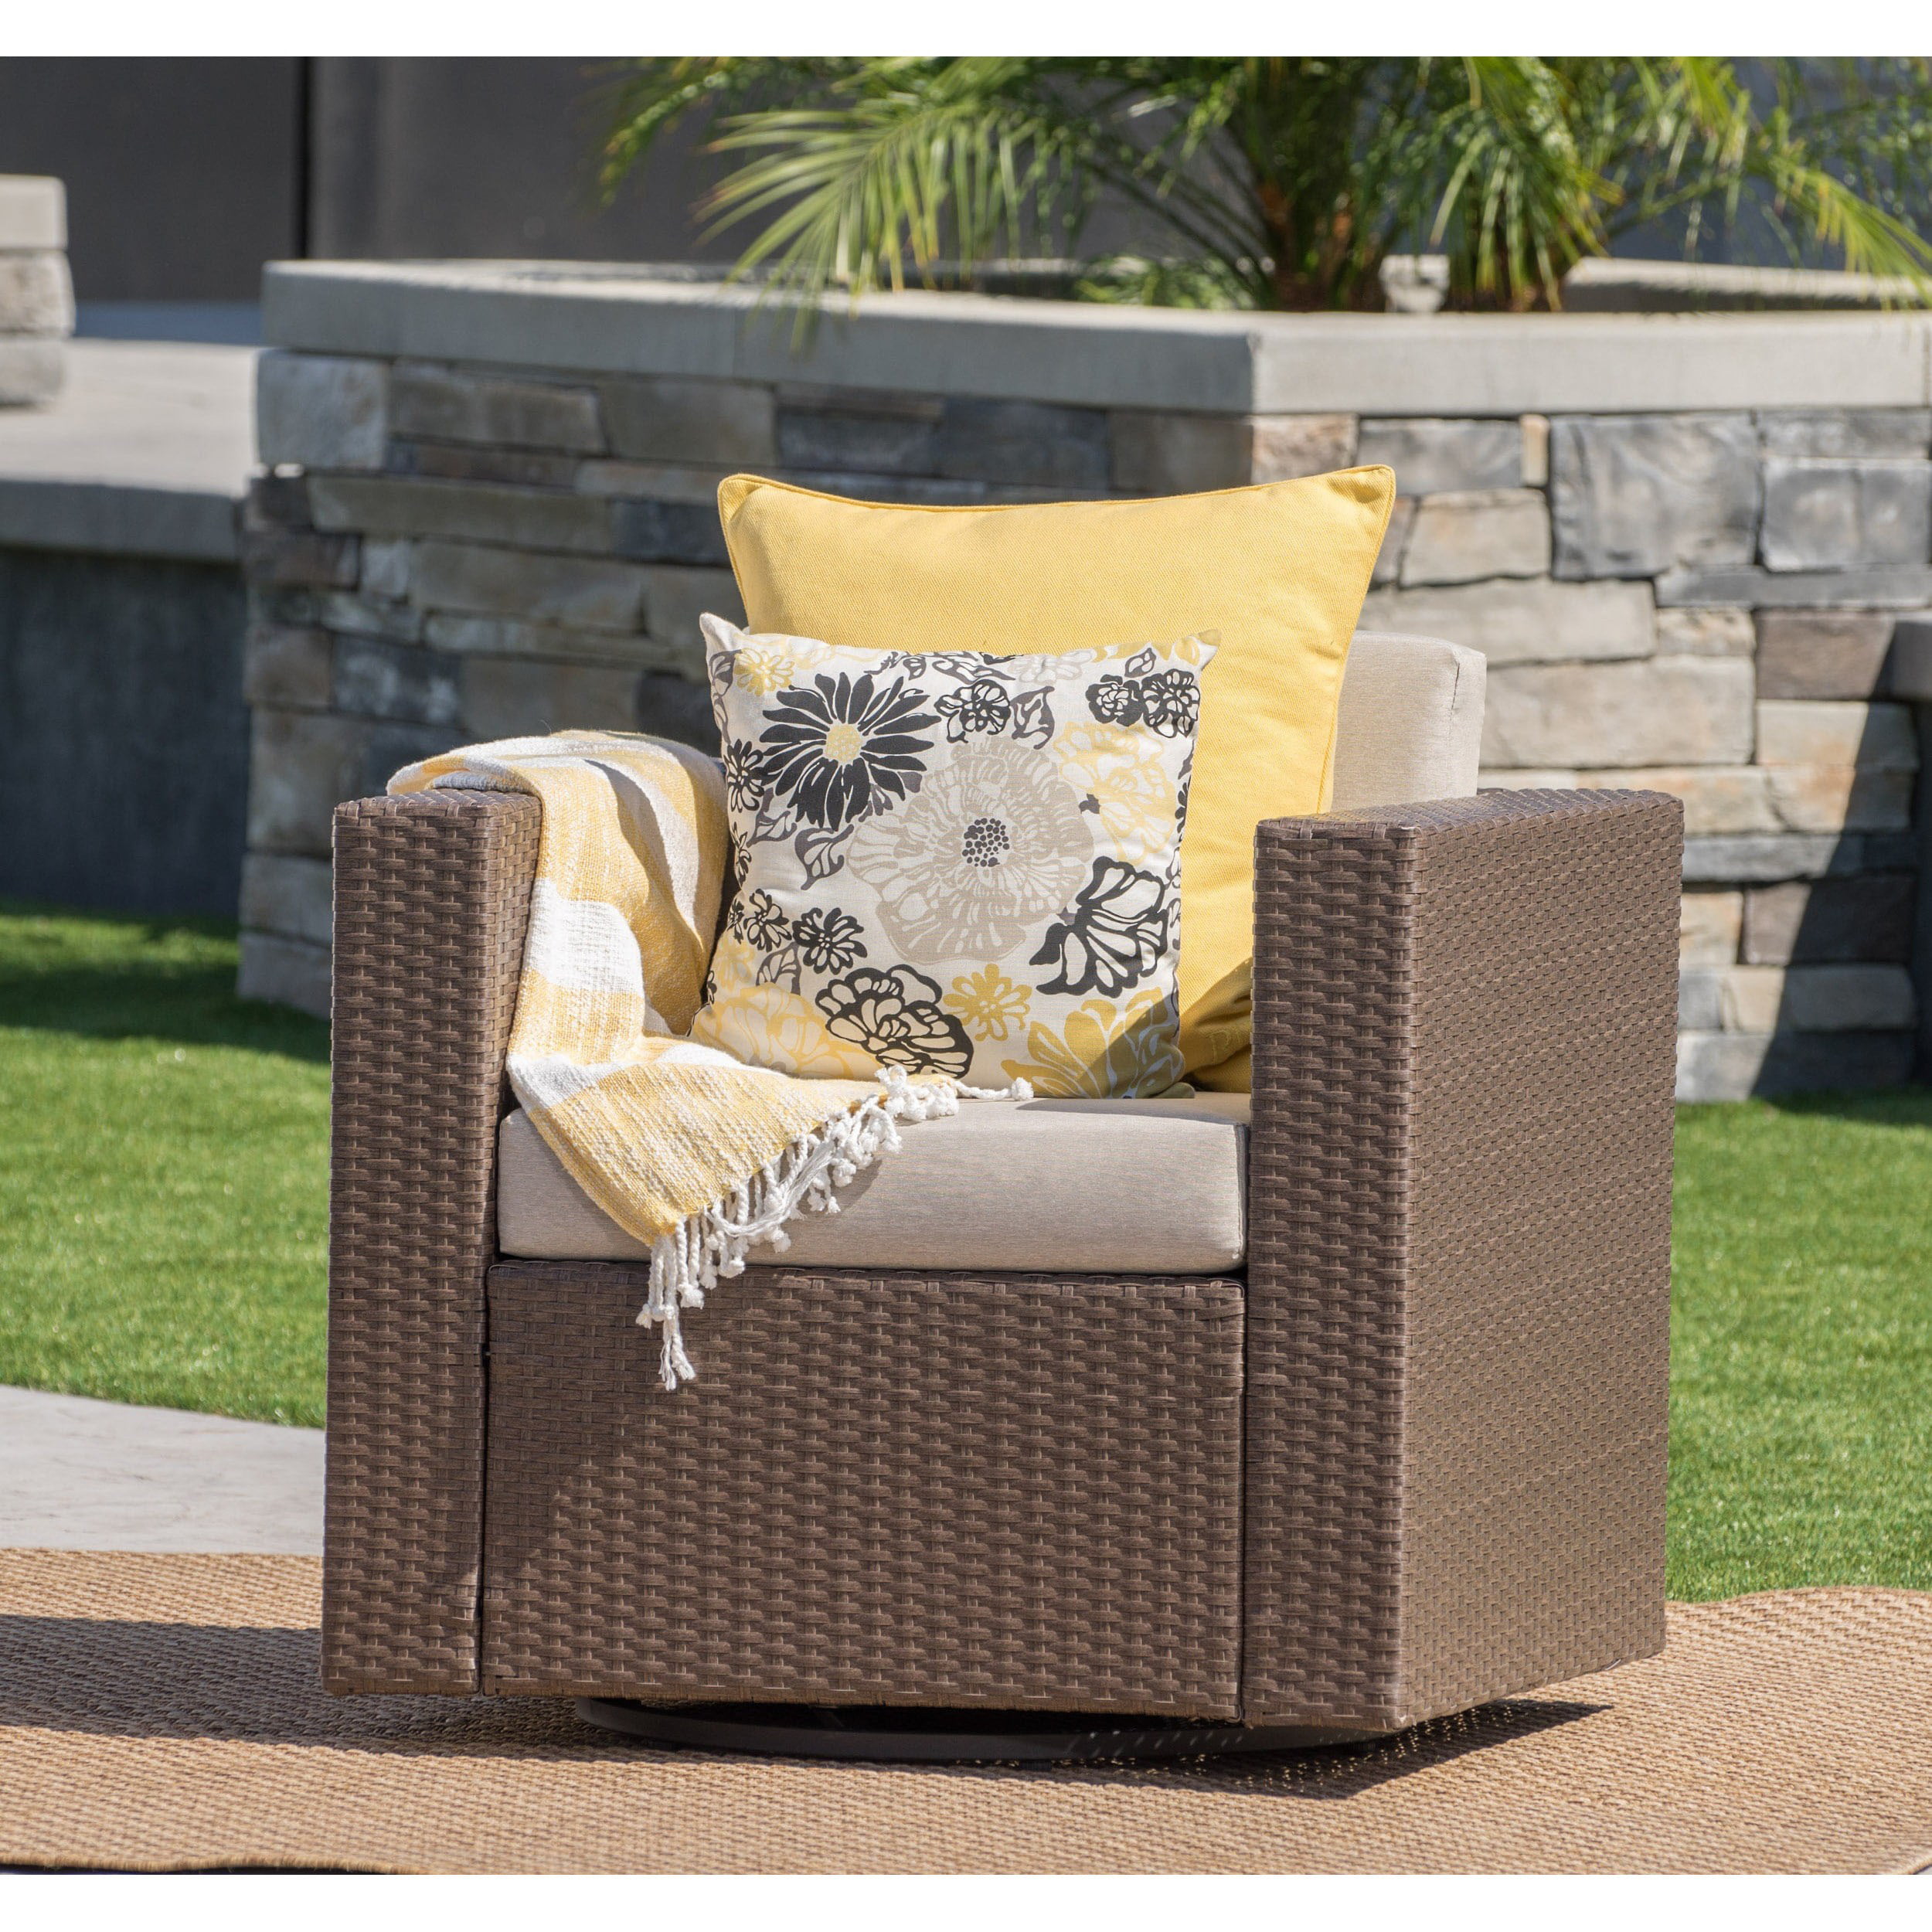 Christopher Knight Home Puerta Outdoor Wicker Swivel Club Chair with